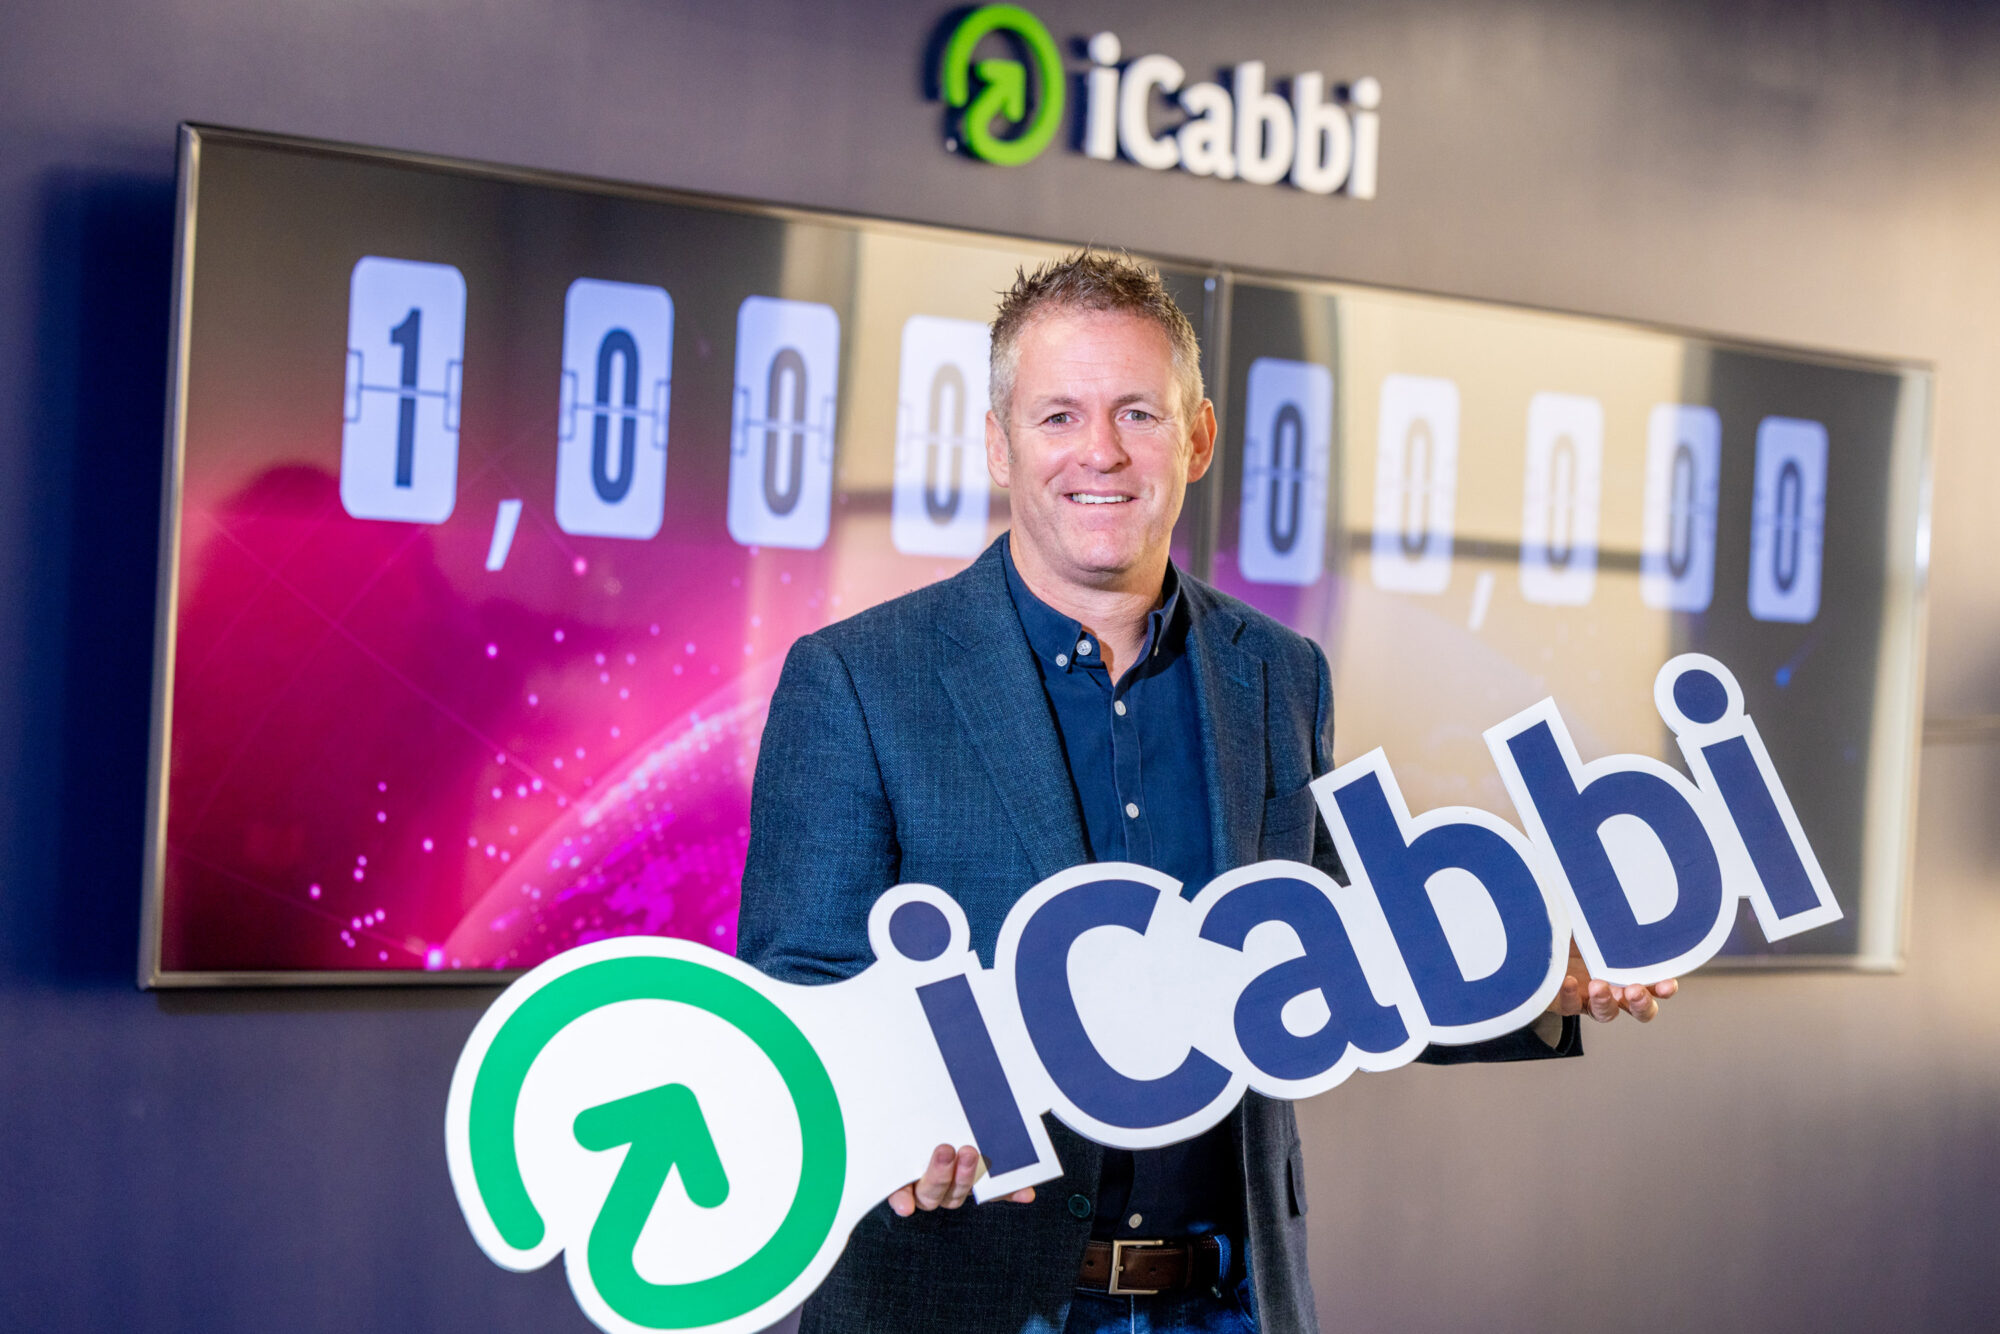 One billion taxi bookings for Mobilize tech company iCabbi